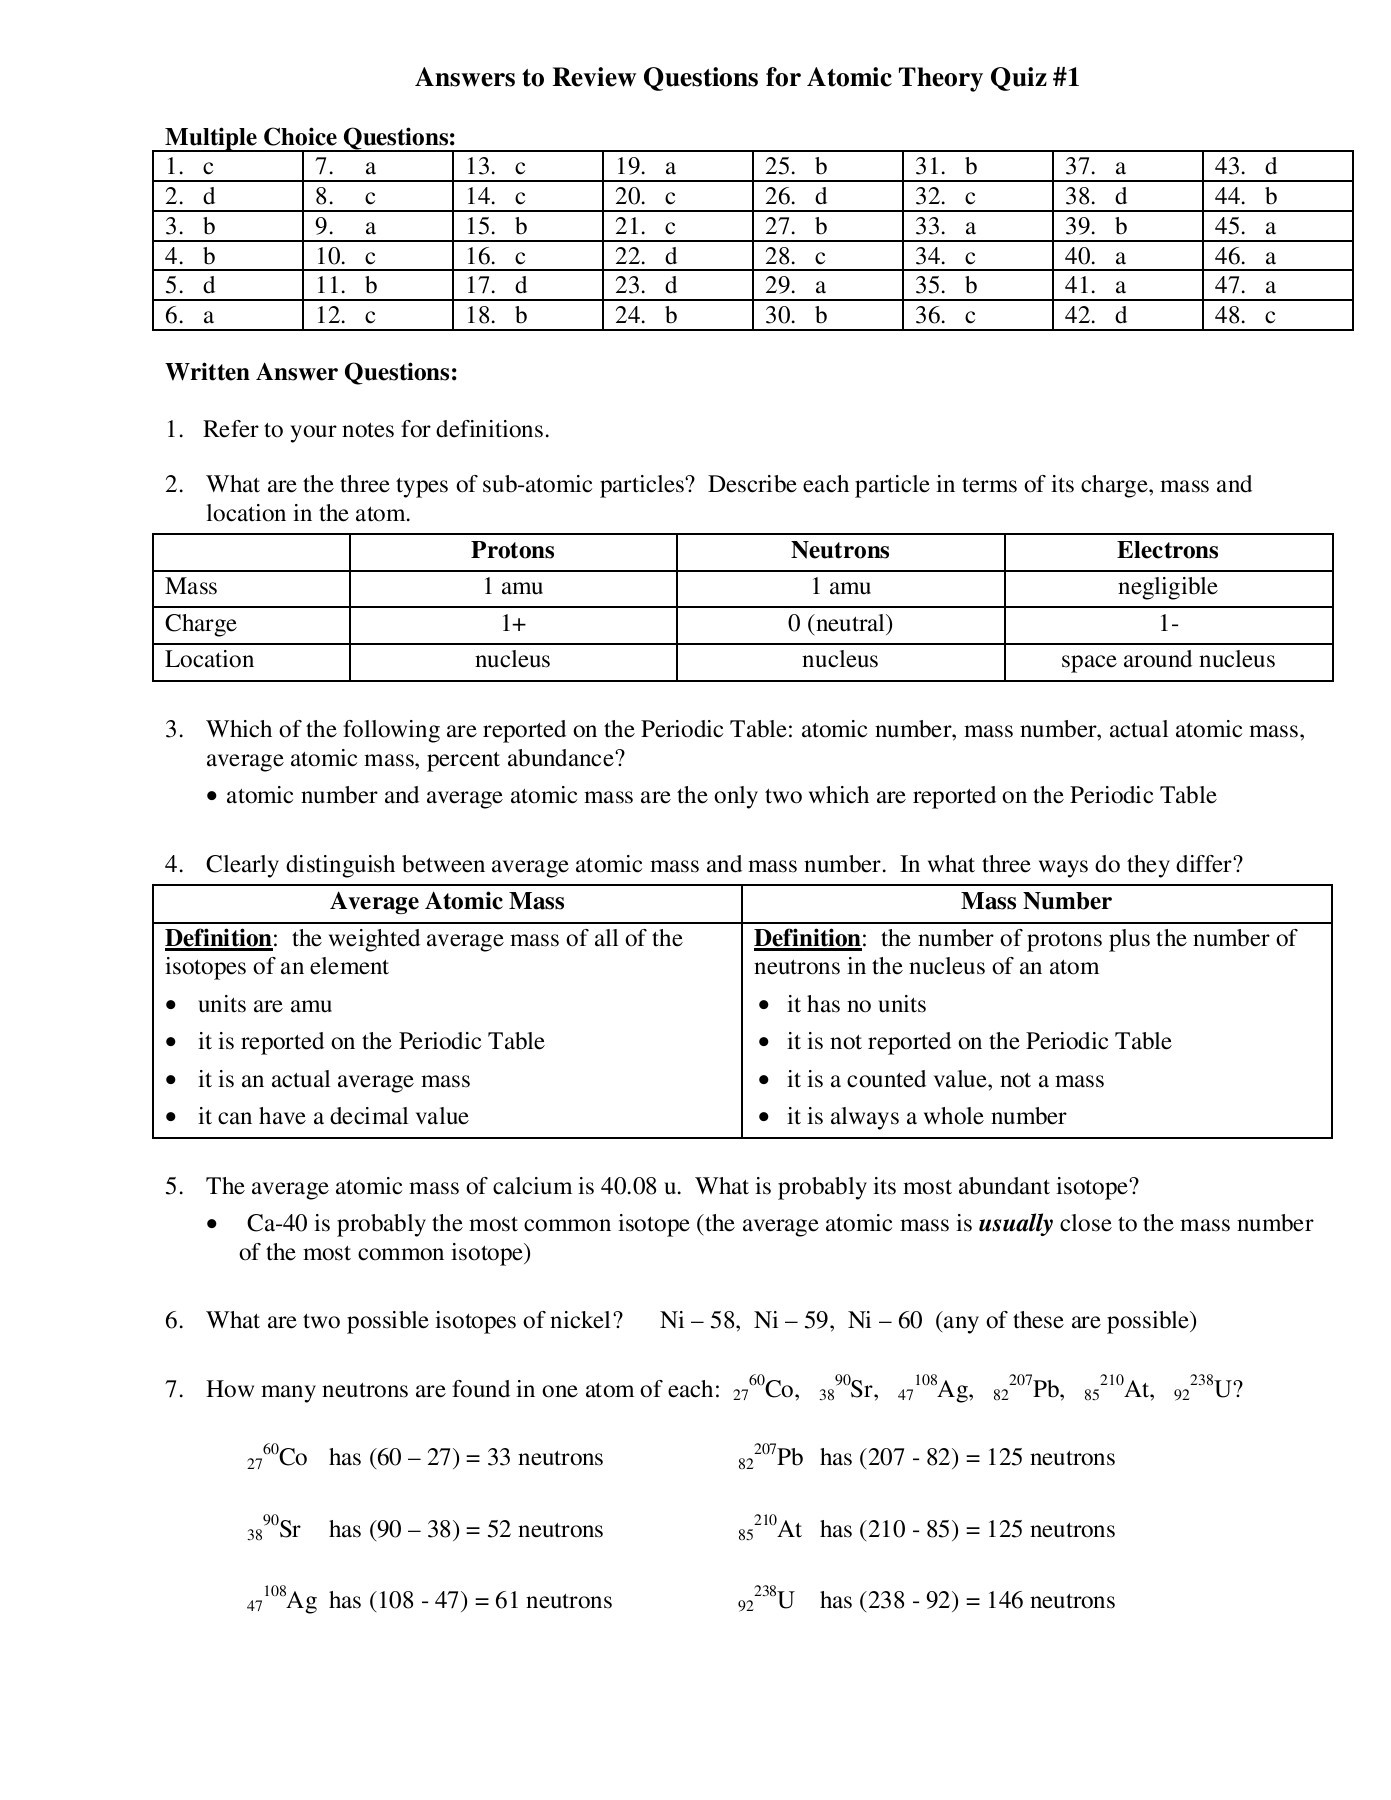 Calculating Average atomic Mass Worksheet Answers to Review Questions for atomic theory Quiz 1 Pages